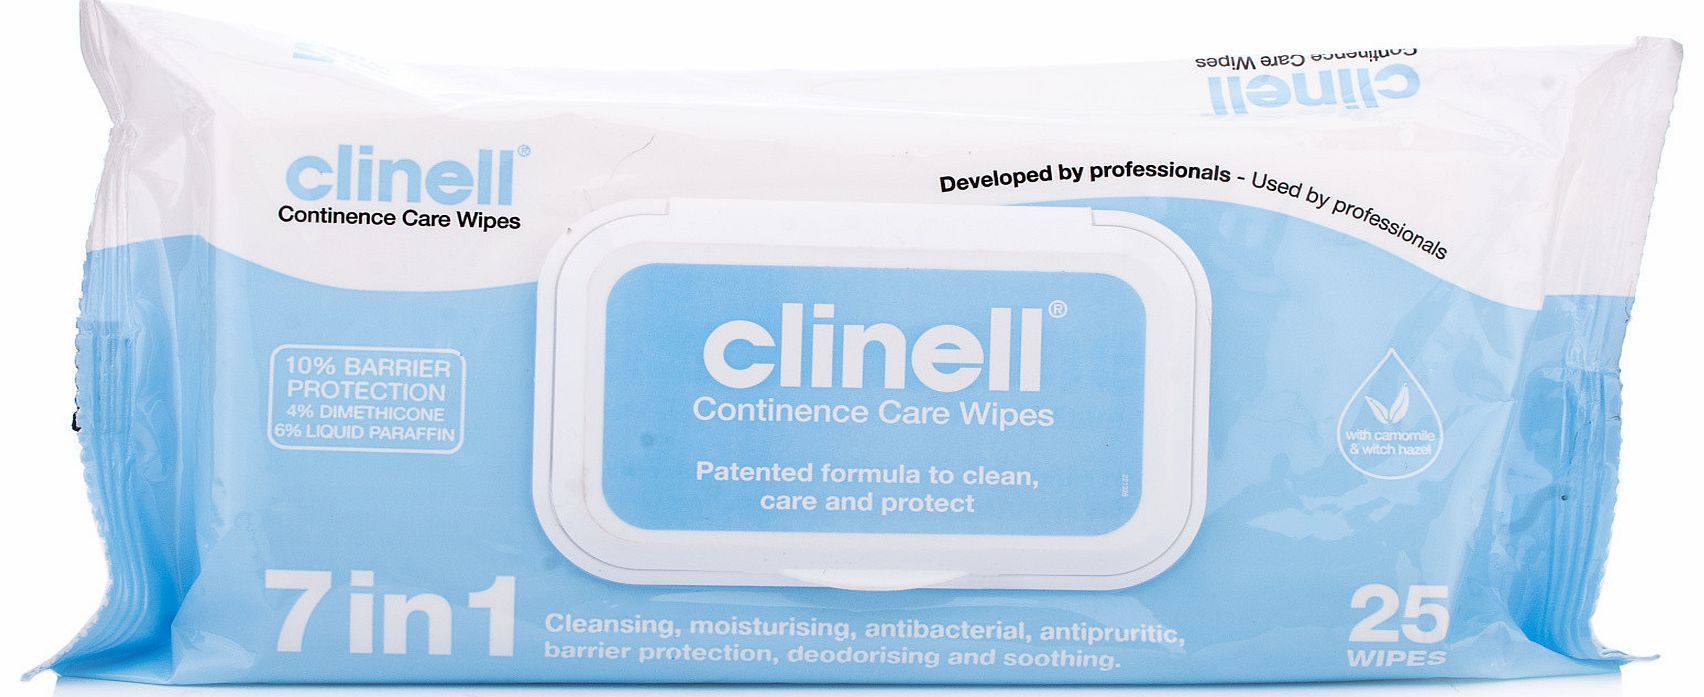 Clinell Continence Care Wipes